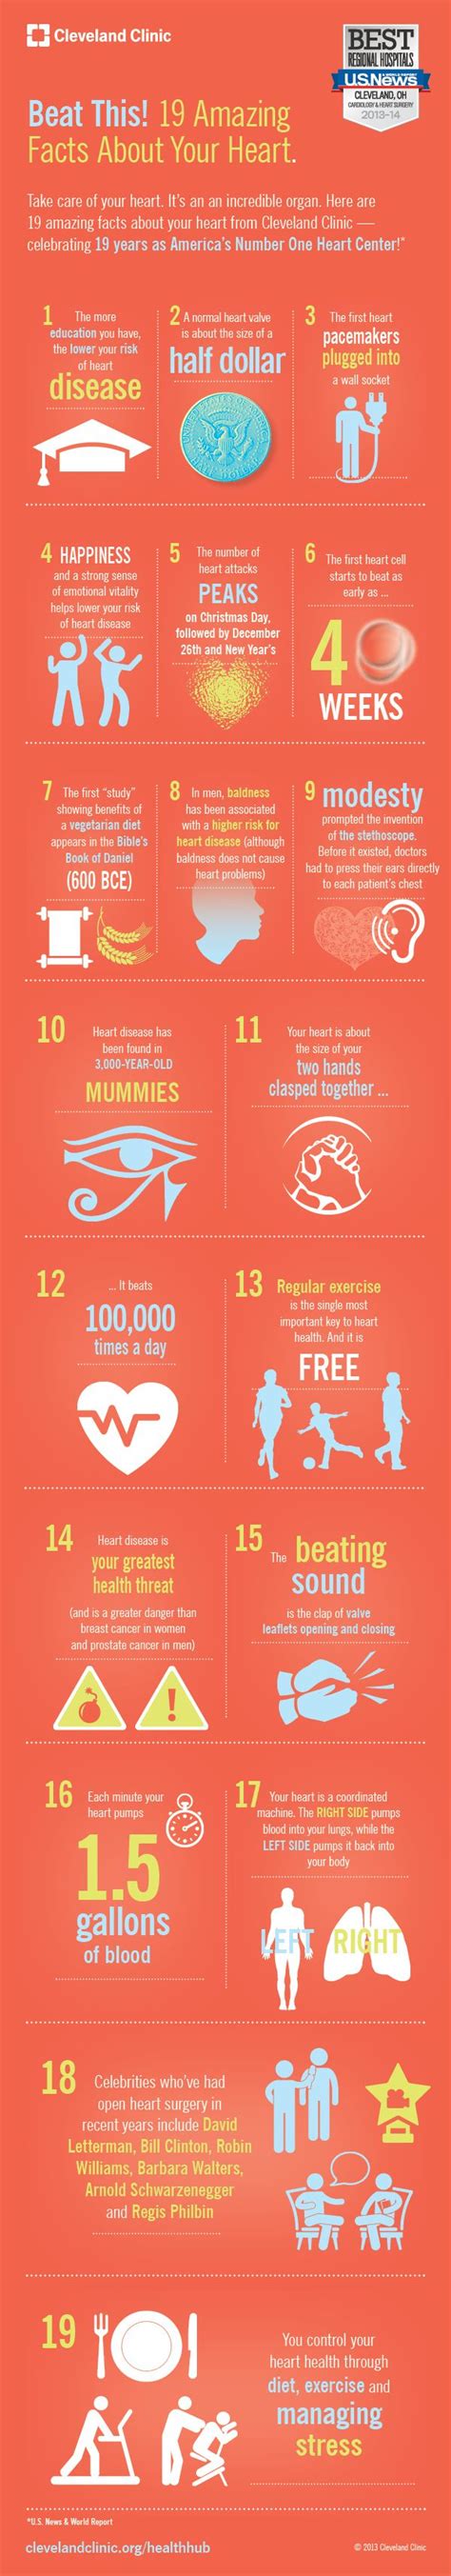 Love This Infograph From The Cleveland Clinic 19 Amazing Facts About